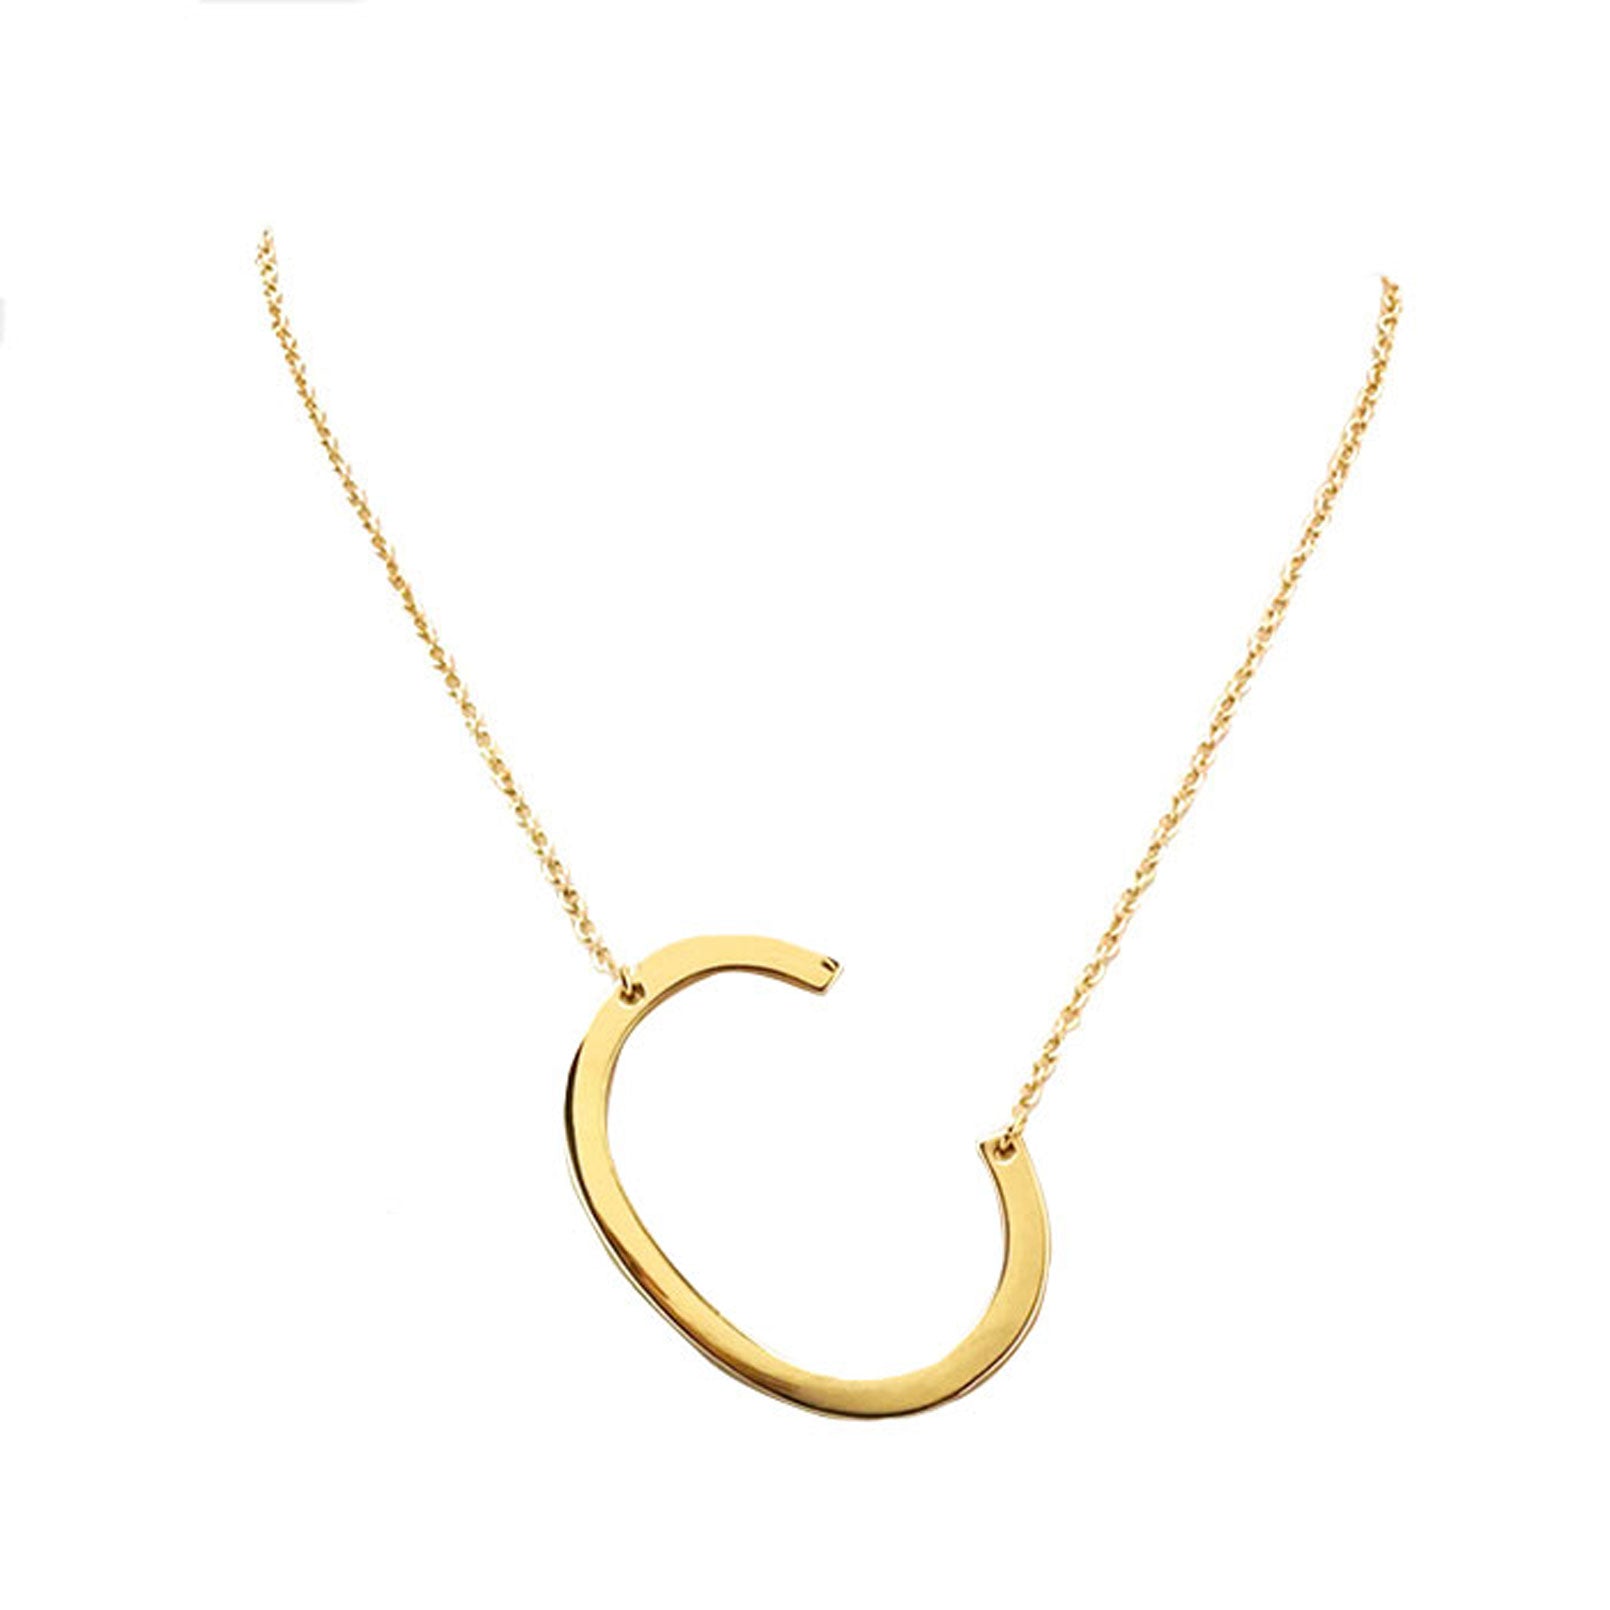 Gold C Monogram Metal Pendant Necklace. Beautifully crafted design adds a gorgeous glow to any outfit. Jewelry that fits your lifestyle! Perfect Birthday Gift, Anniversary Gift, Mother's Day Gift, Anniversary Gift, Graduation Gift, Prom Jewelry, Just Because Gift, Thank you Gift.